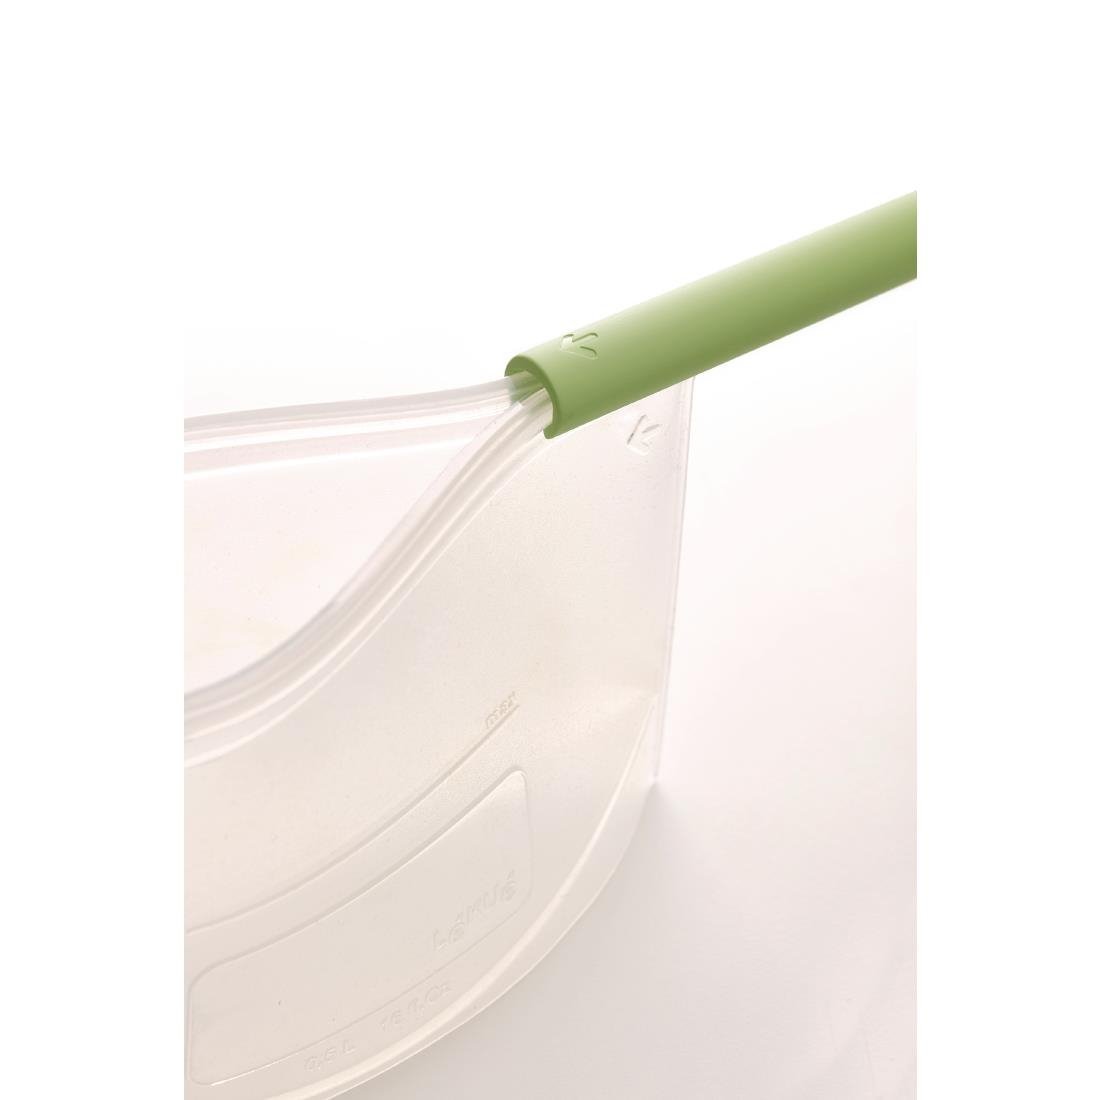 FS287 Lekue Reusable Silicone Food Storage Bag 500ml JD Catering Equipment Solutions Ltd